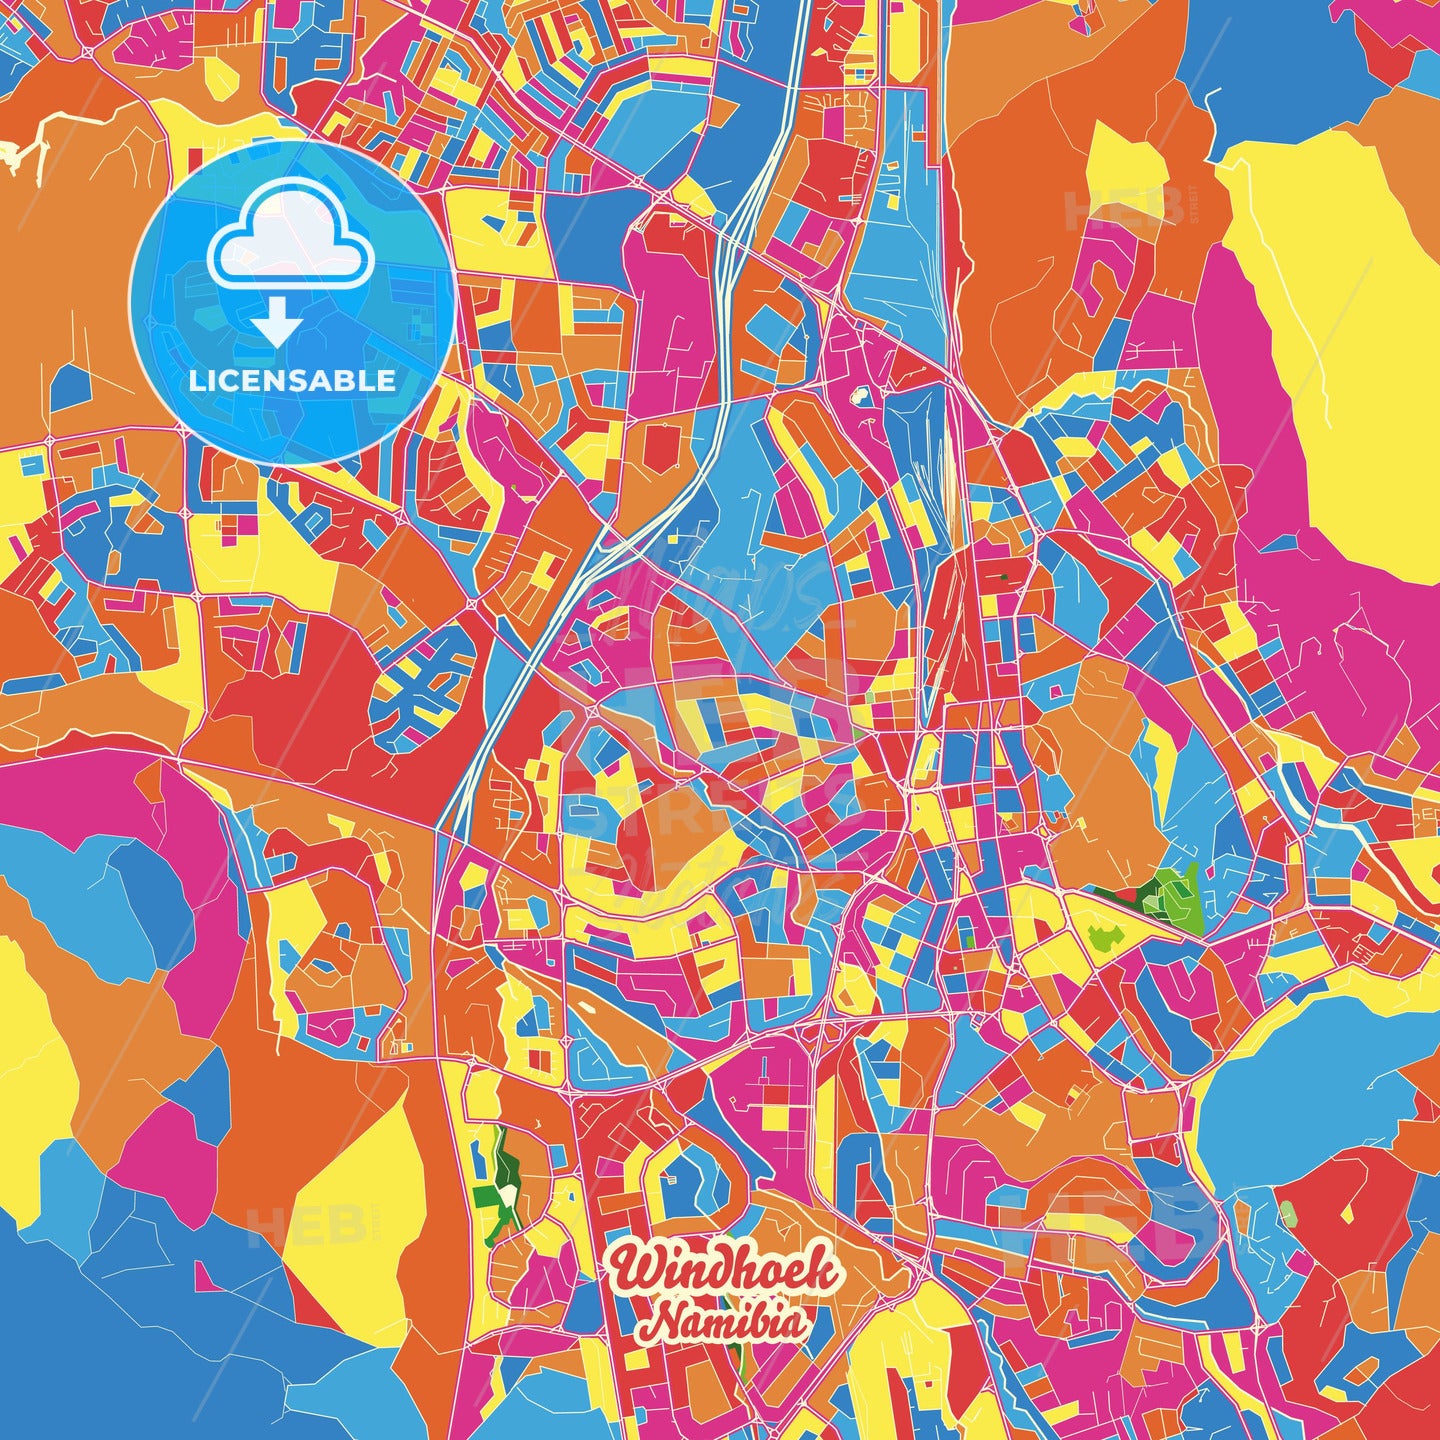 Windhoek, Namibia Crazy Colorful Street Map Poster Template - HEBSTREITS Sketches